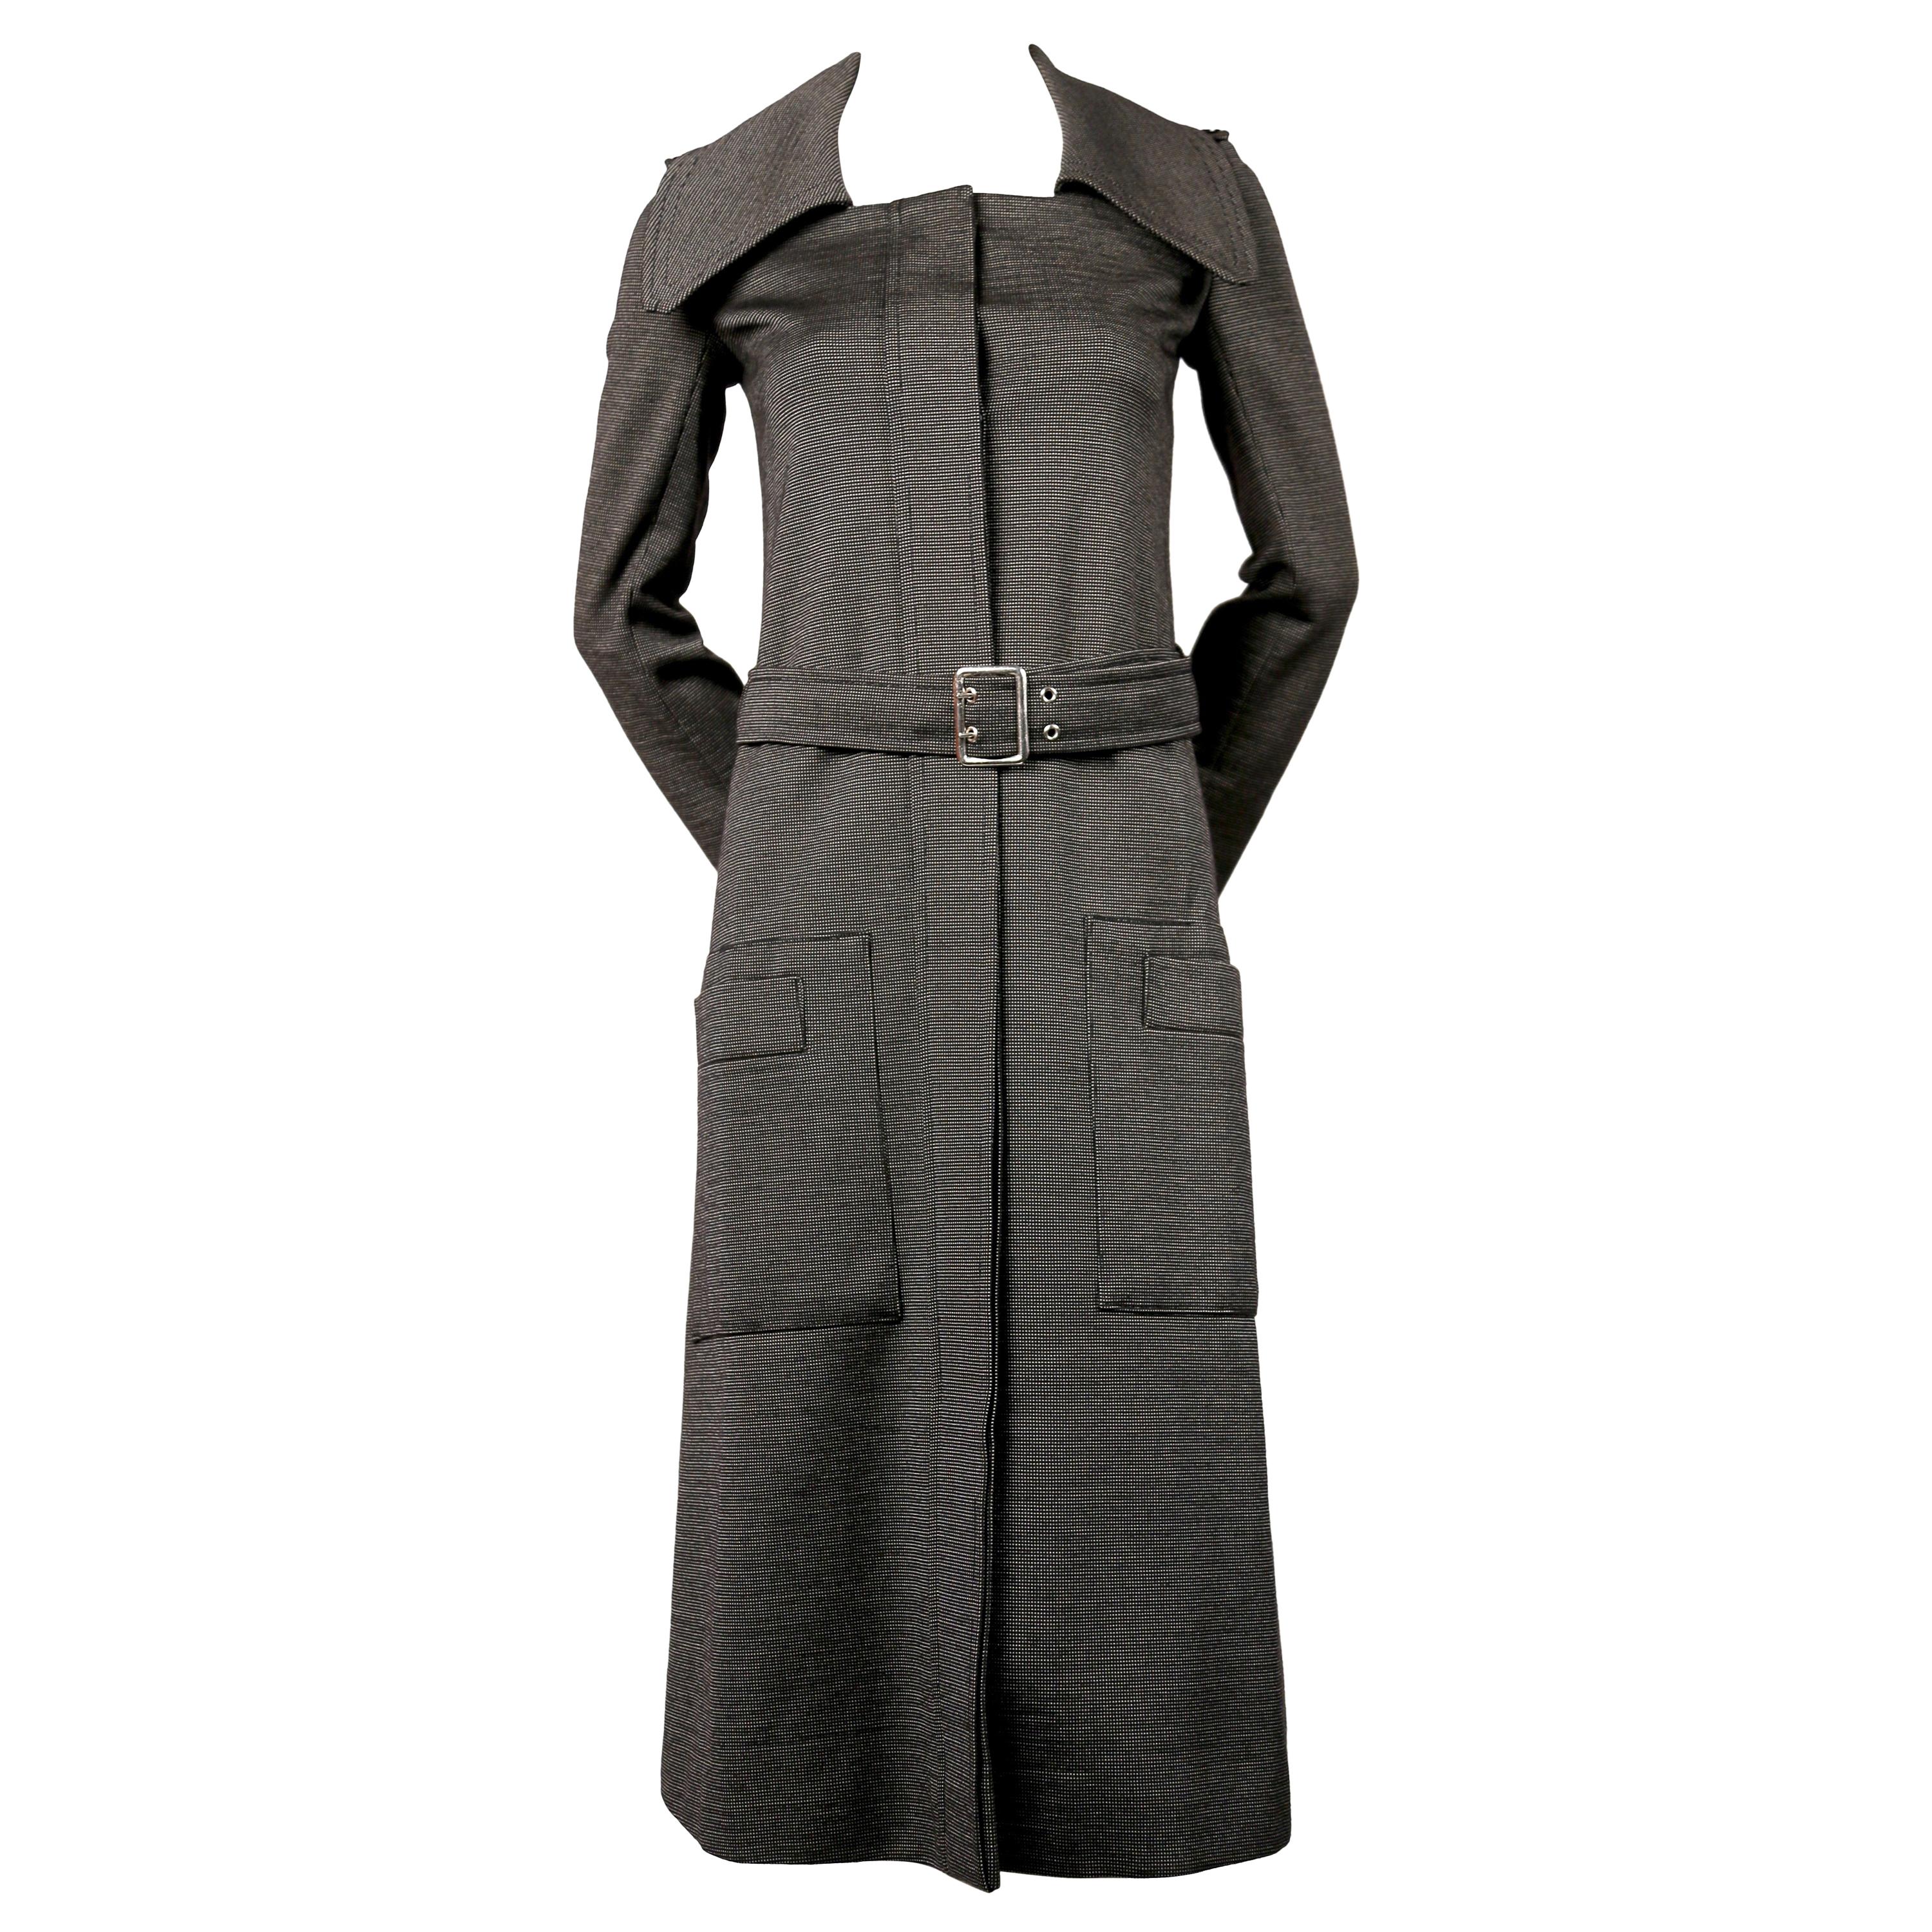 1970's SONIA RYKIEL black fitted trench